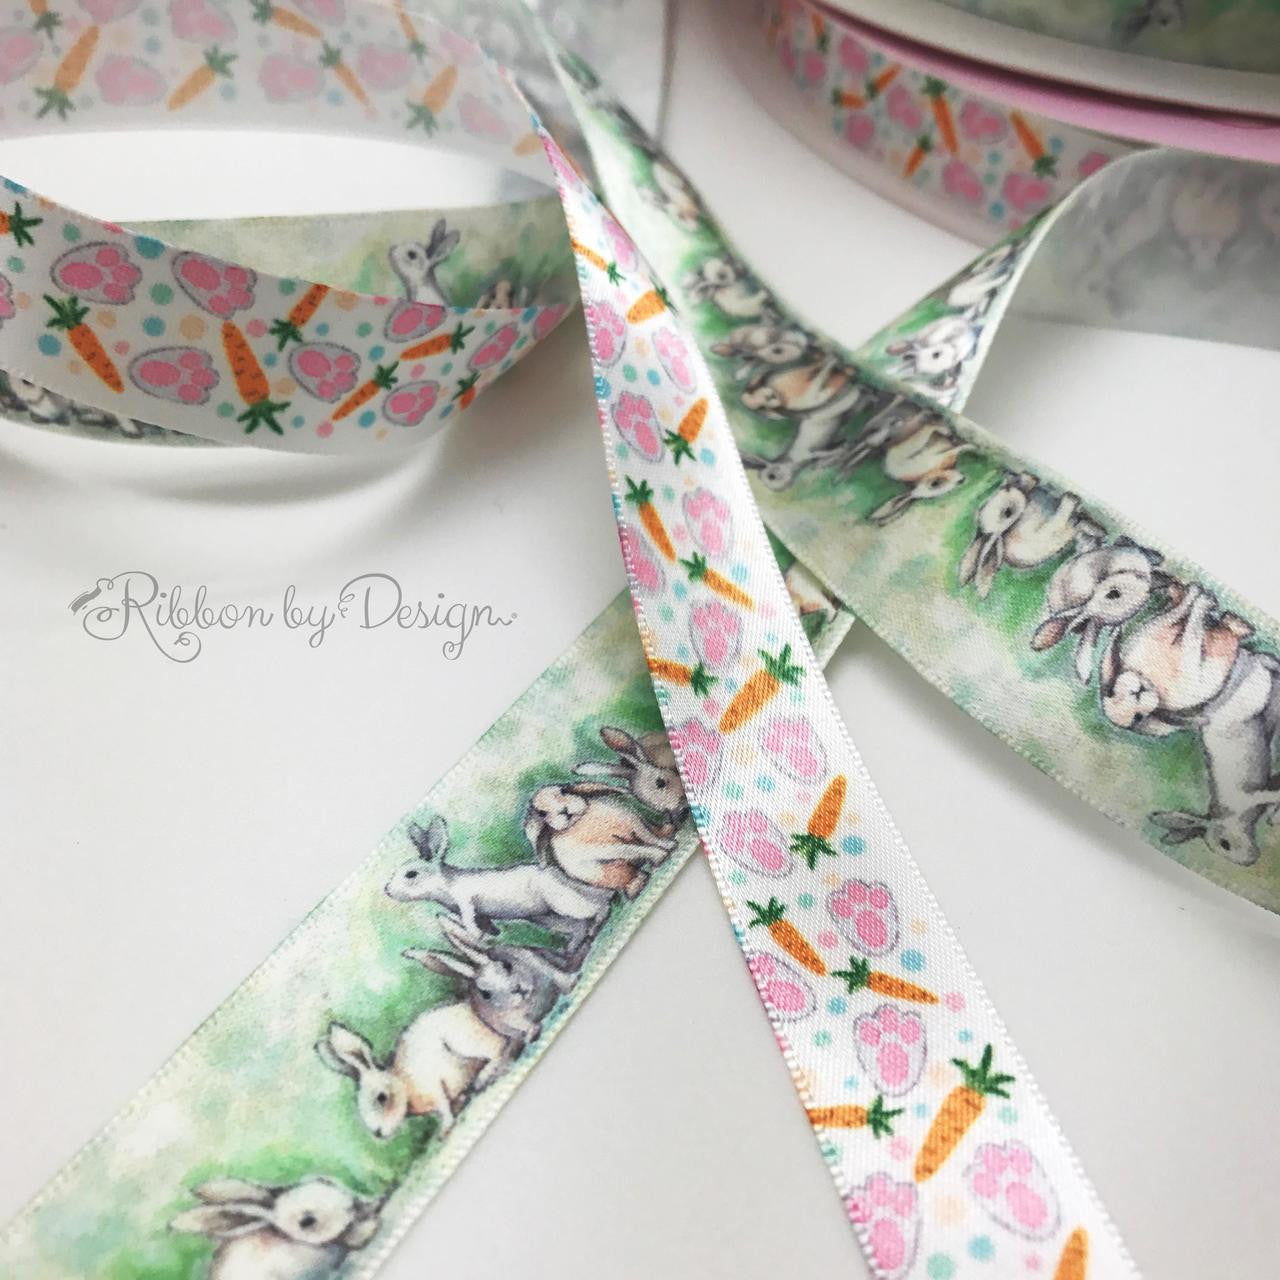 Mix these two sweet ribbons for your Spring events for a truly adorable look!